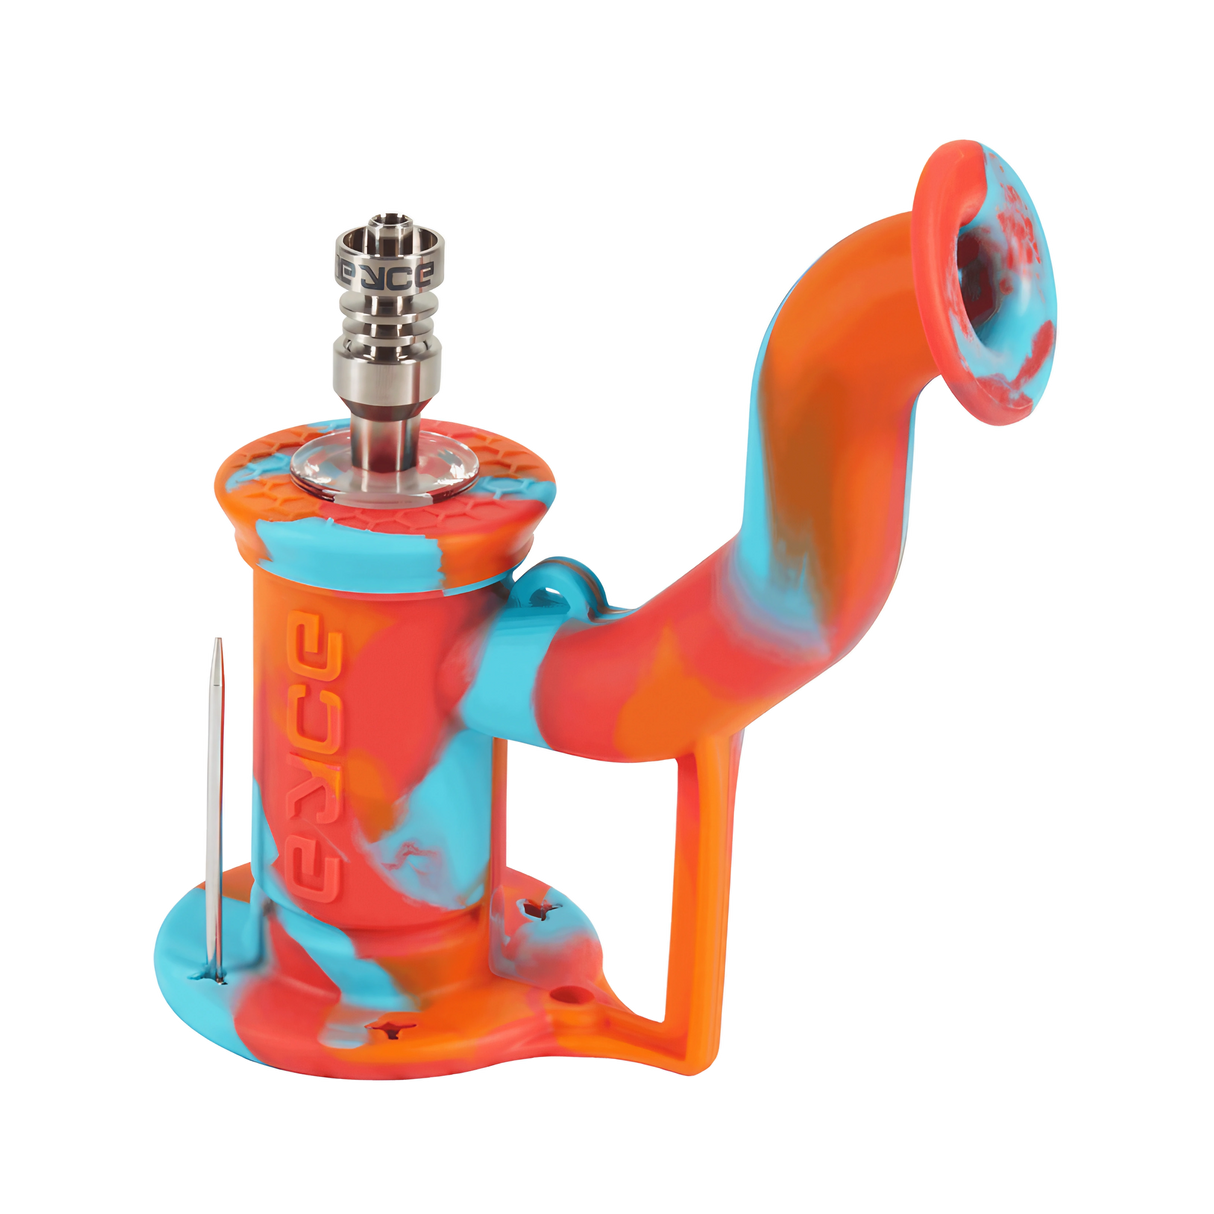 Eyce Rig II in Fuego color variant, a portable silicone dab rig with titanium nail, angled at 90 degrees